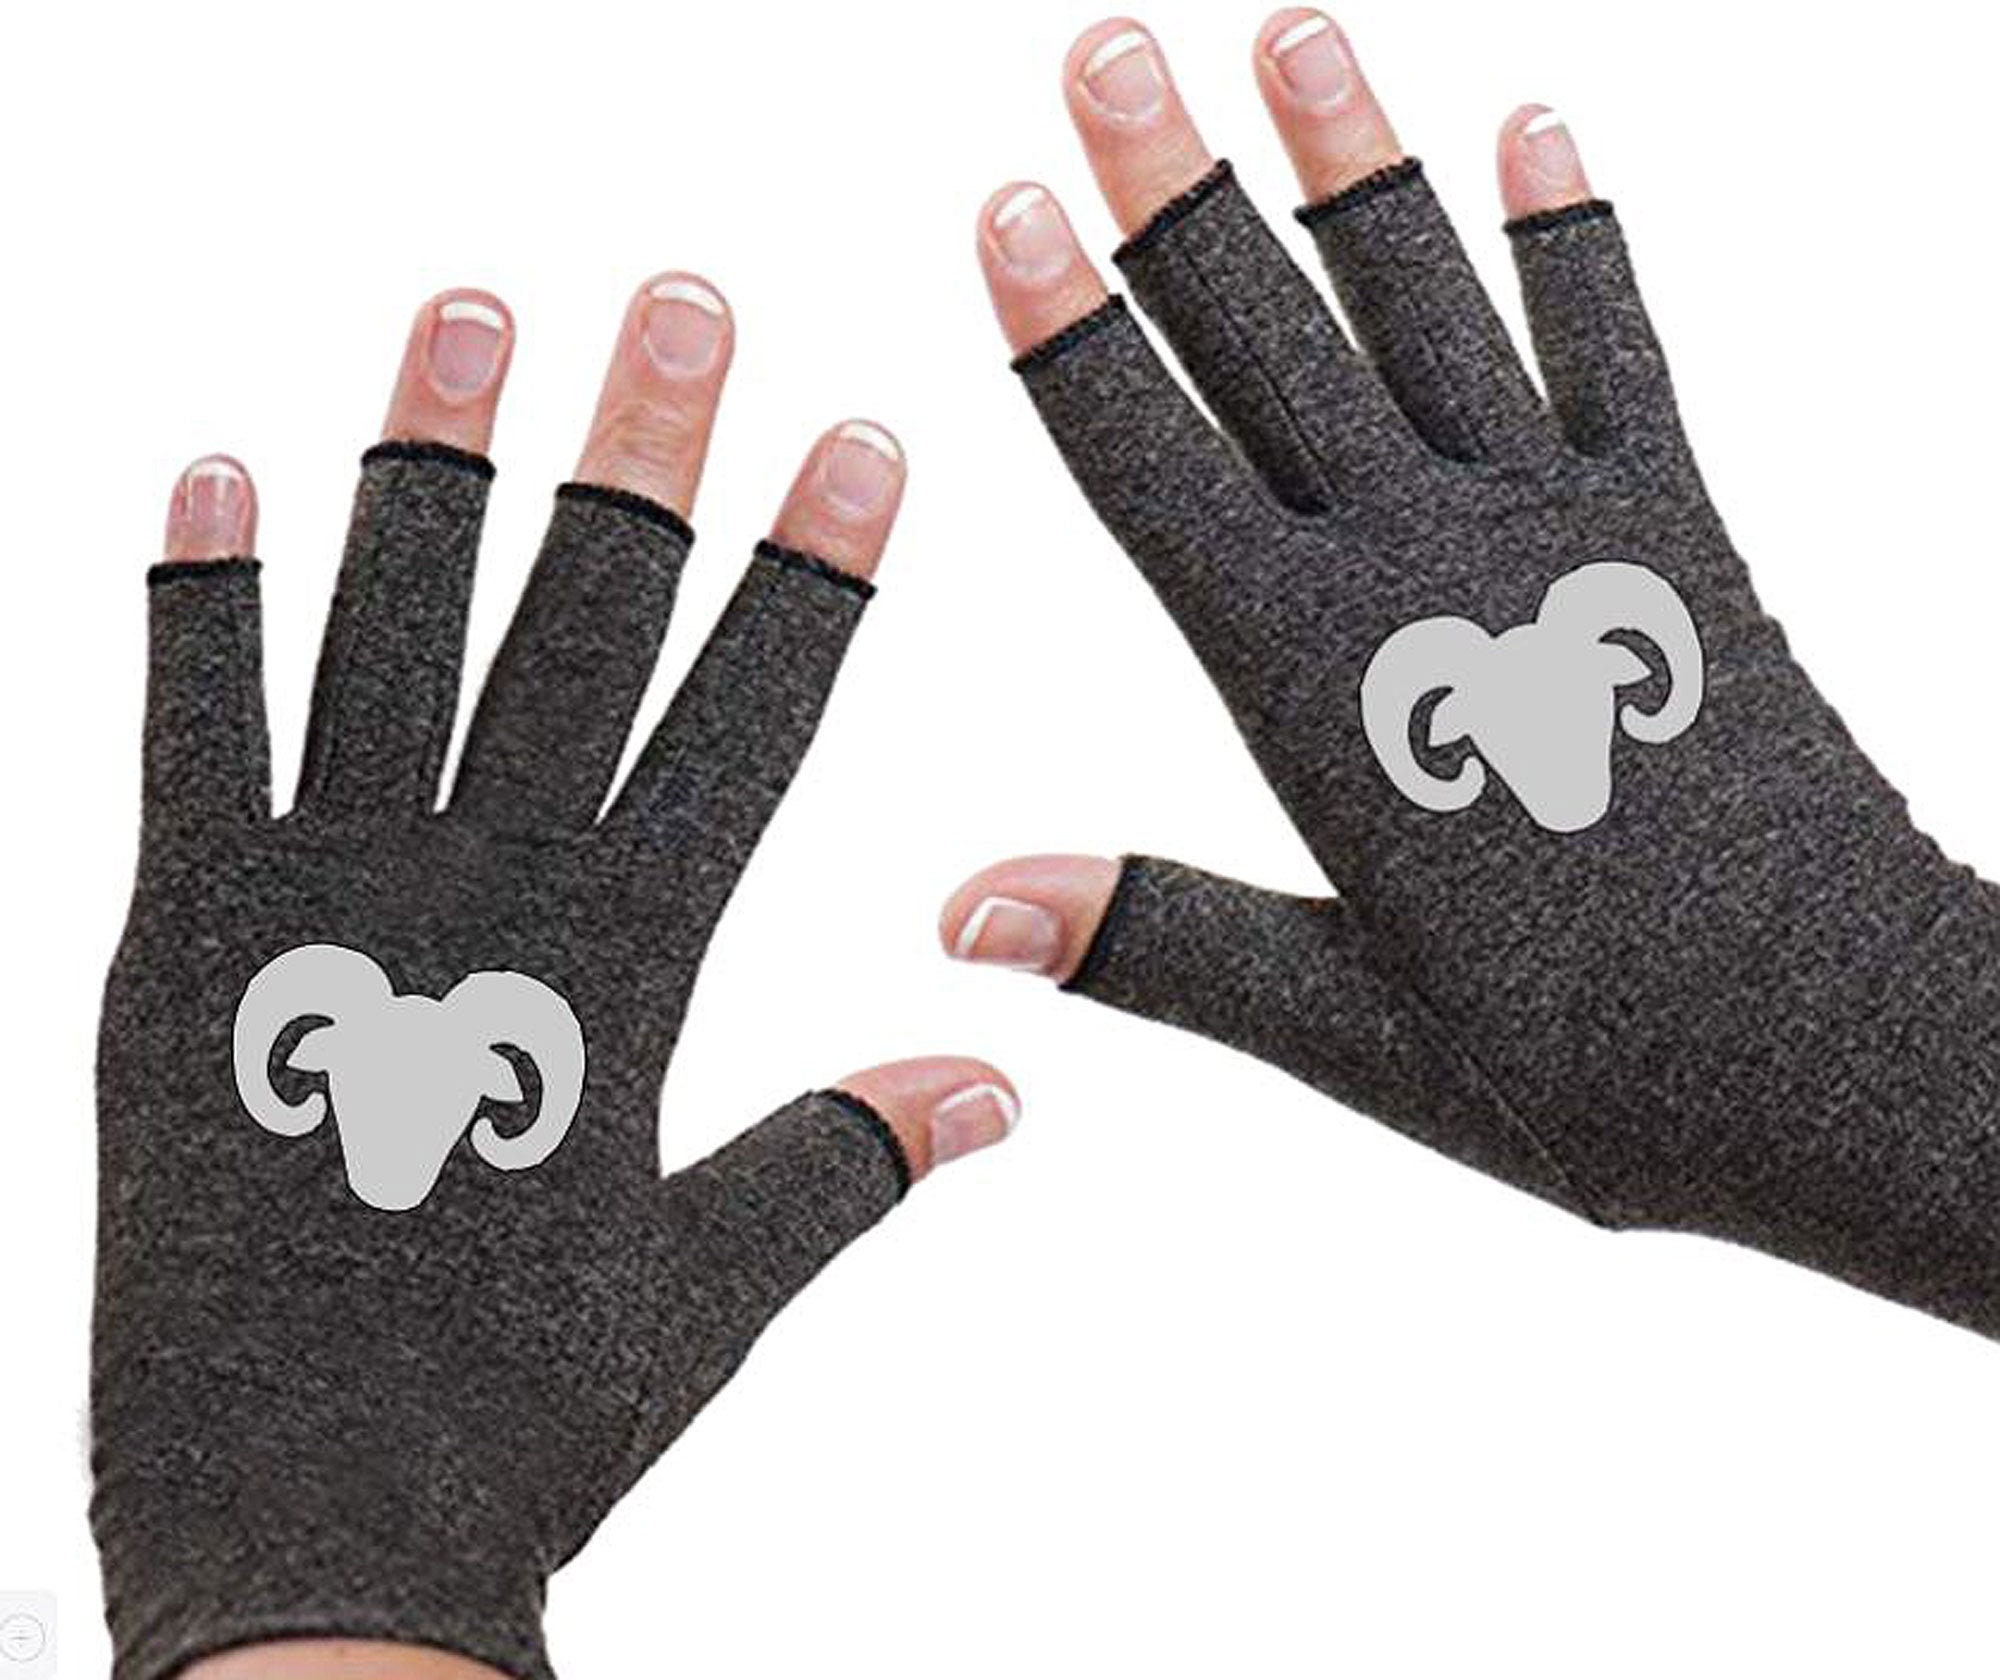 Fingerless Gloves For Women - Arthritis Texting Relief Driving Compression -Taurus